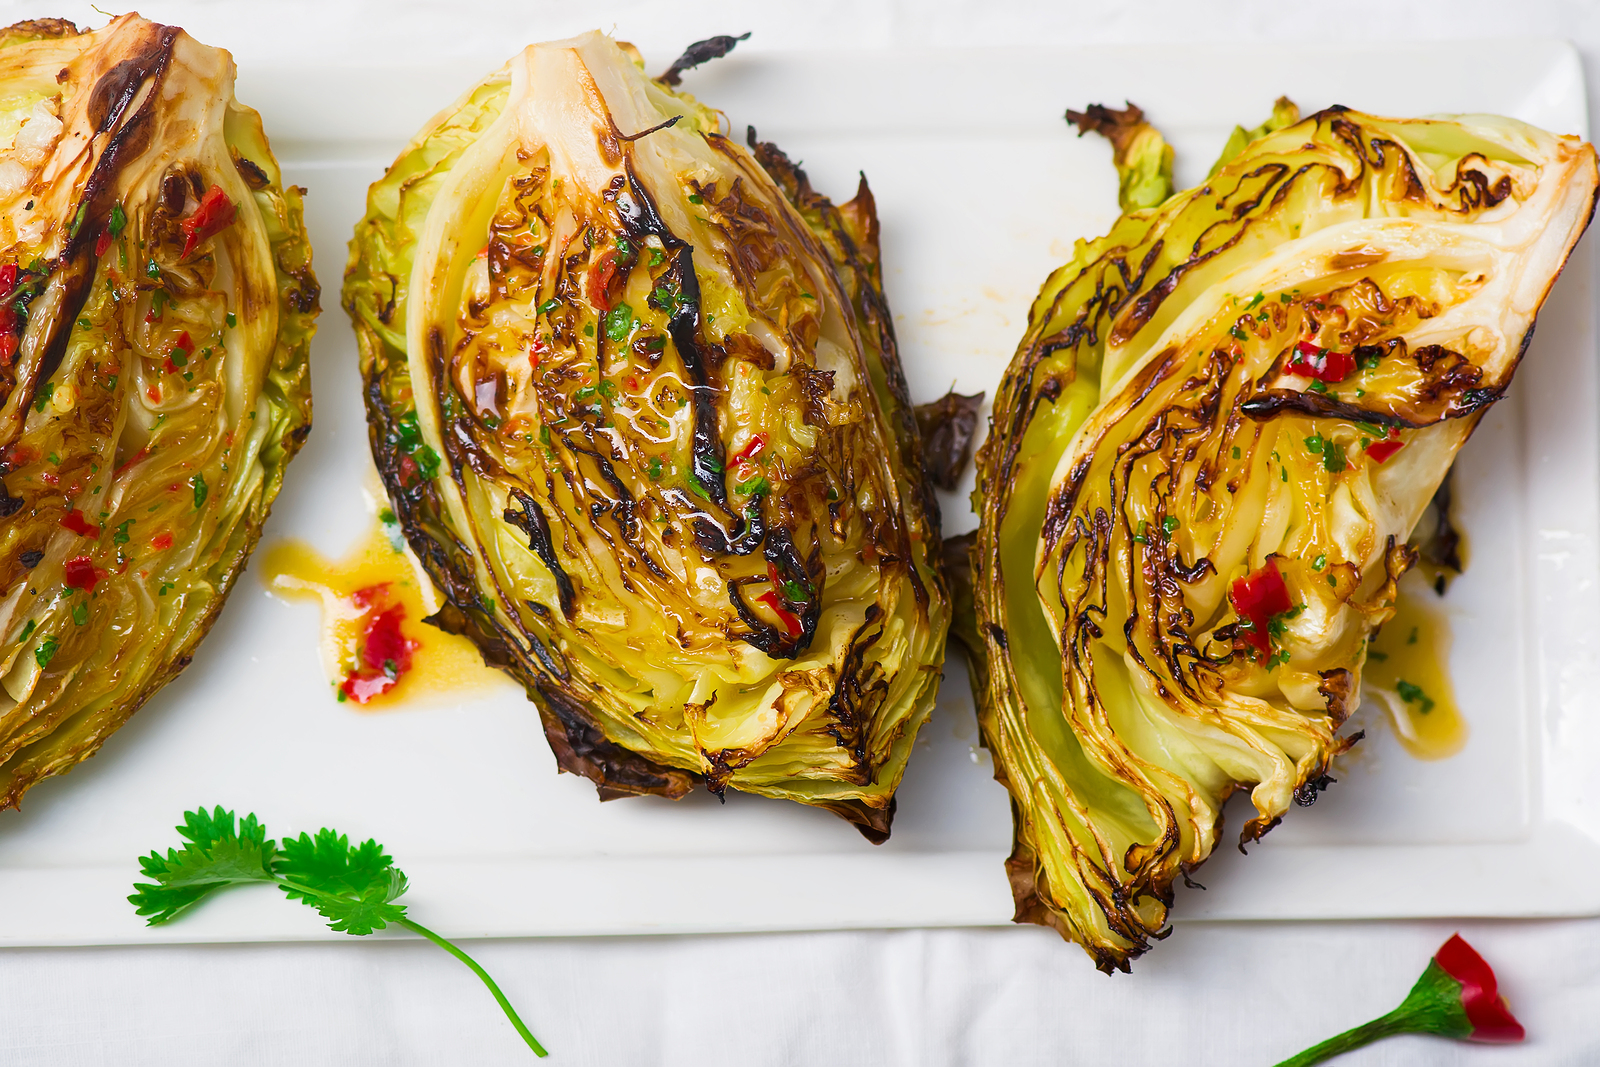 Cabbage on grill